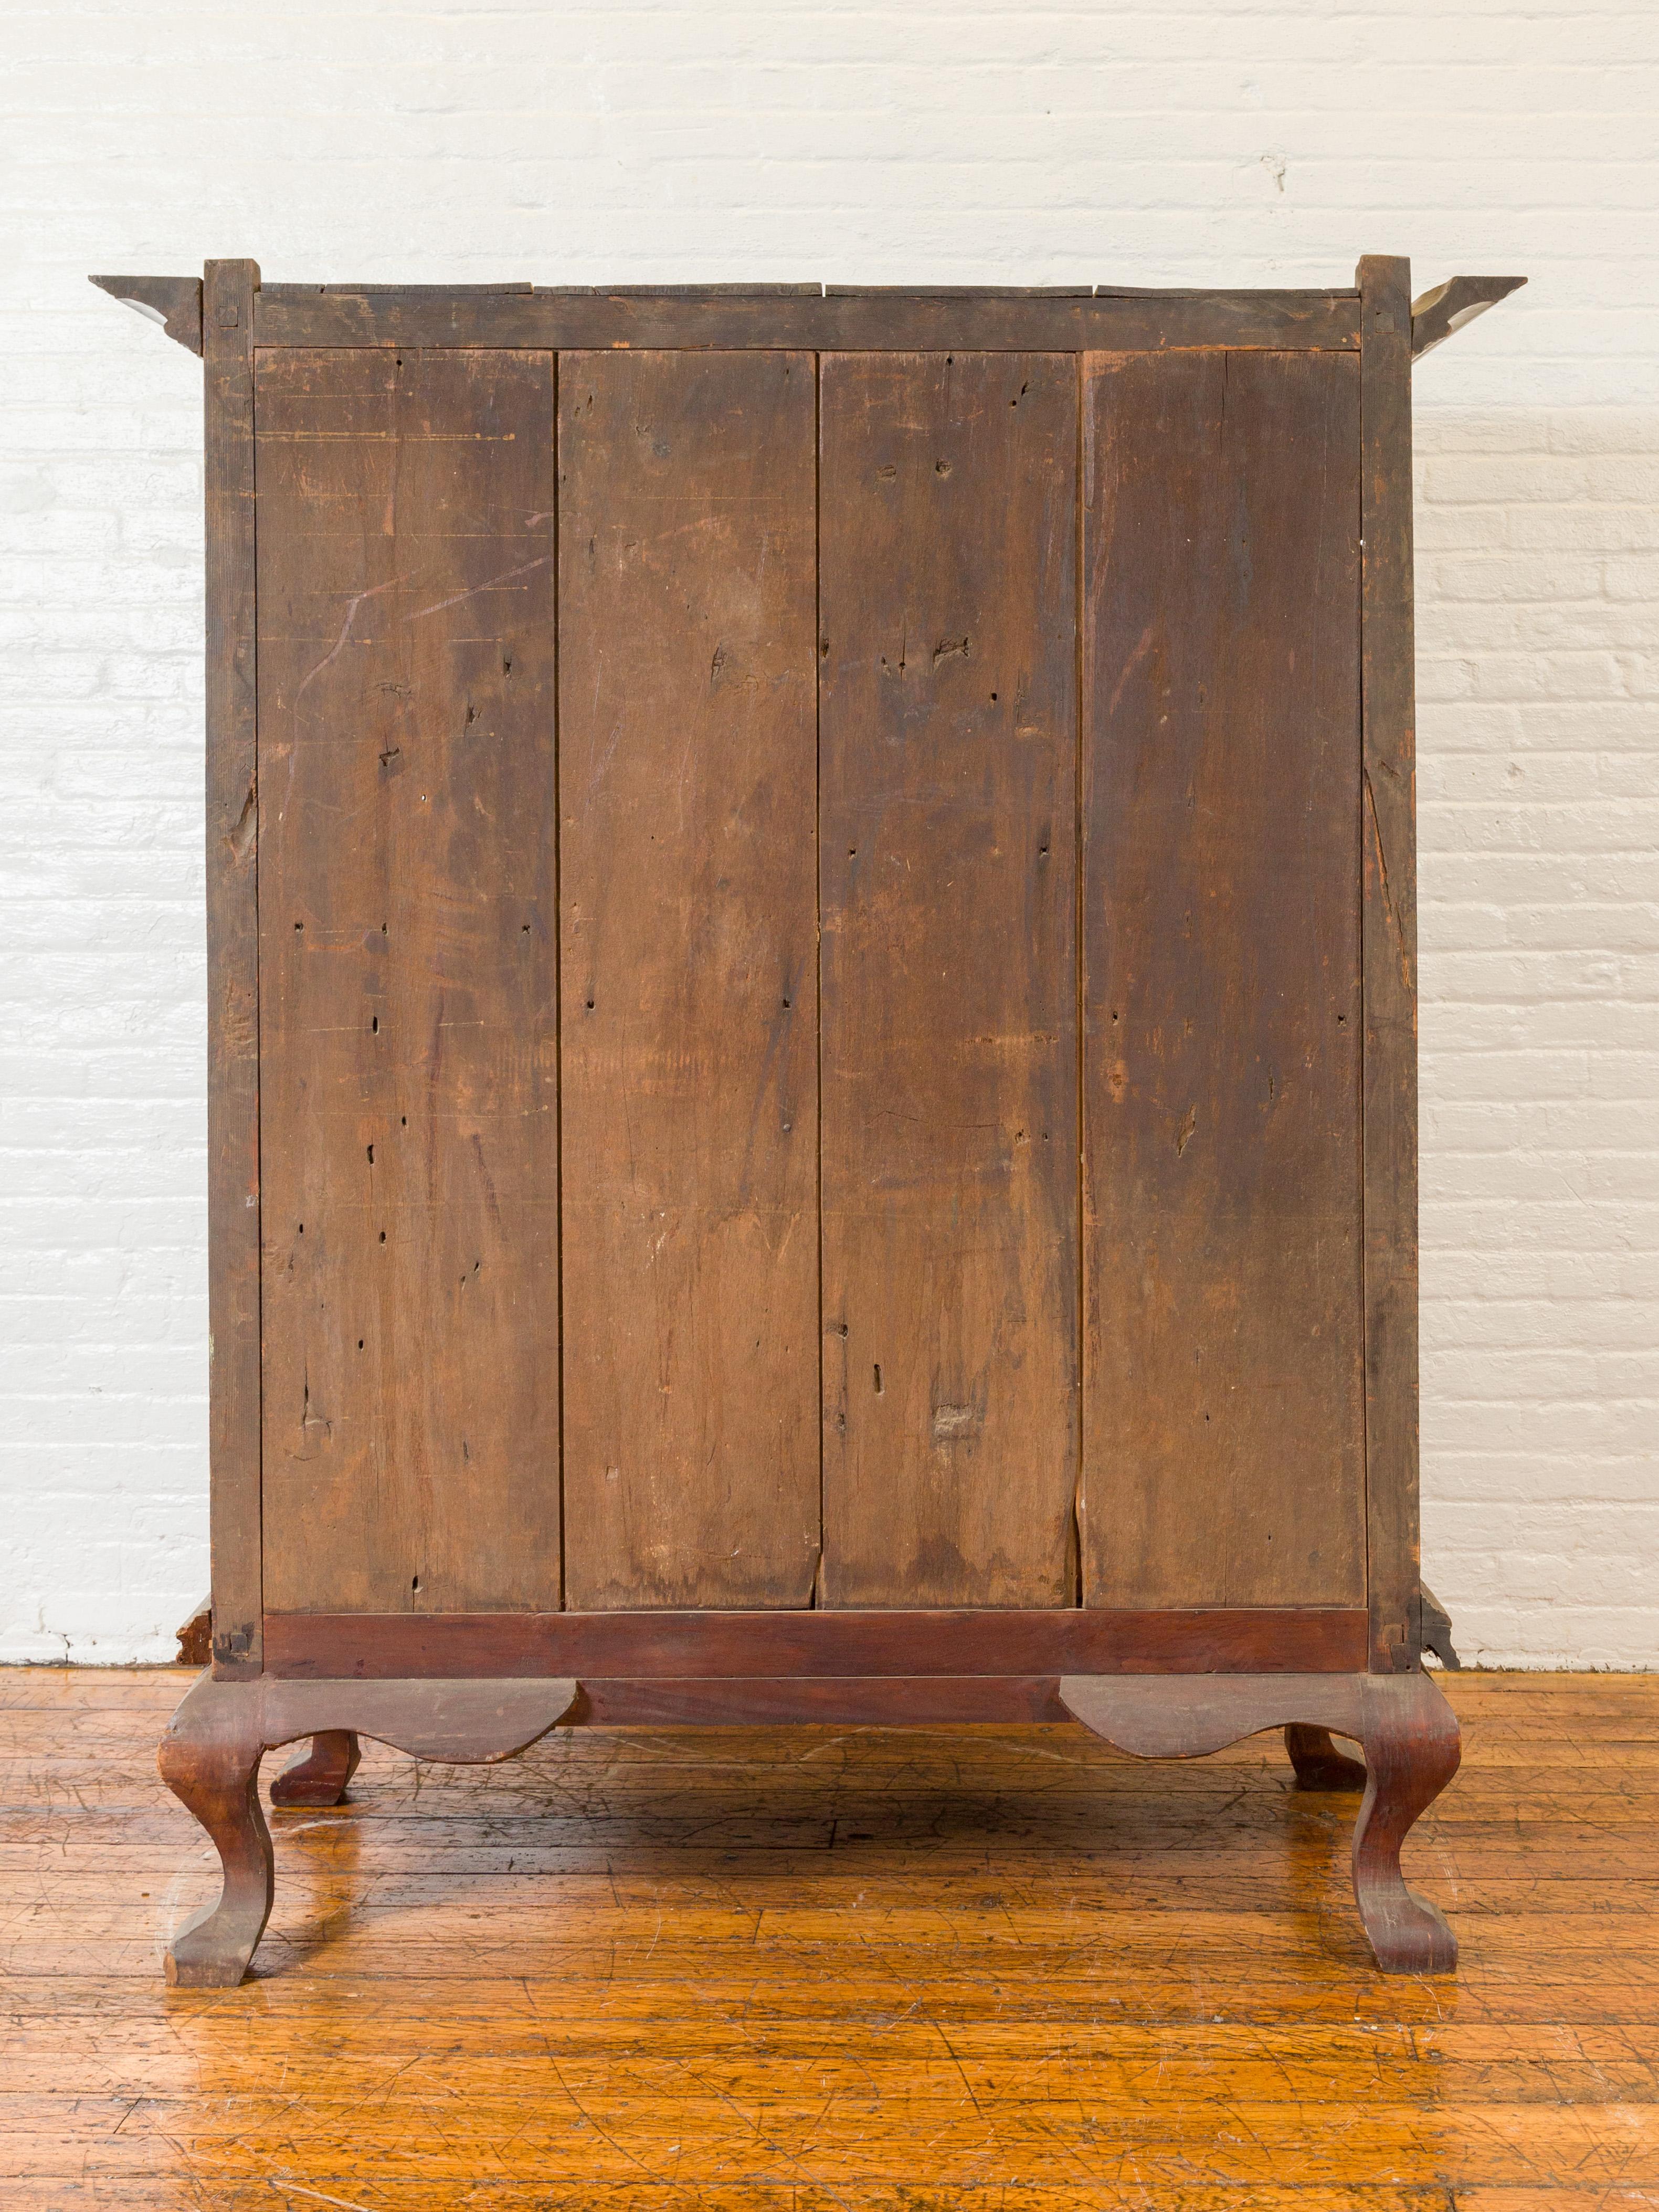 Dutch Colonial Antique Lacquered Wood Cabinet with Glass Doors and Cabriole Legs For Sale 6